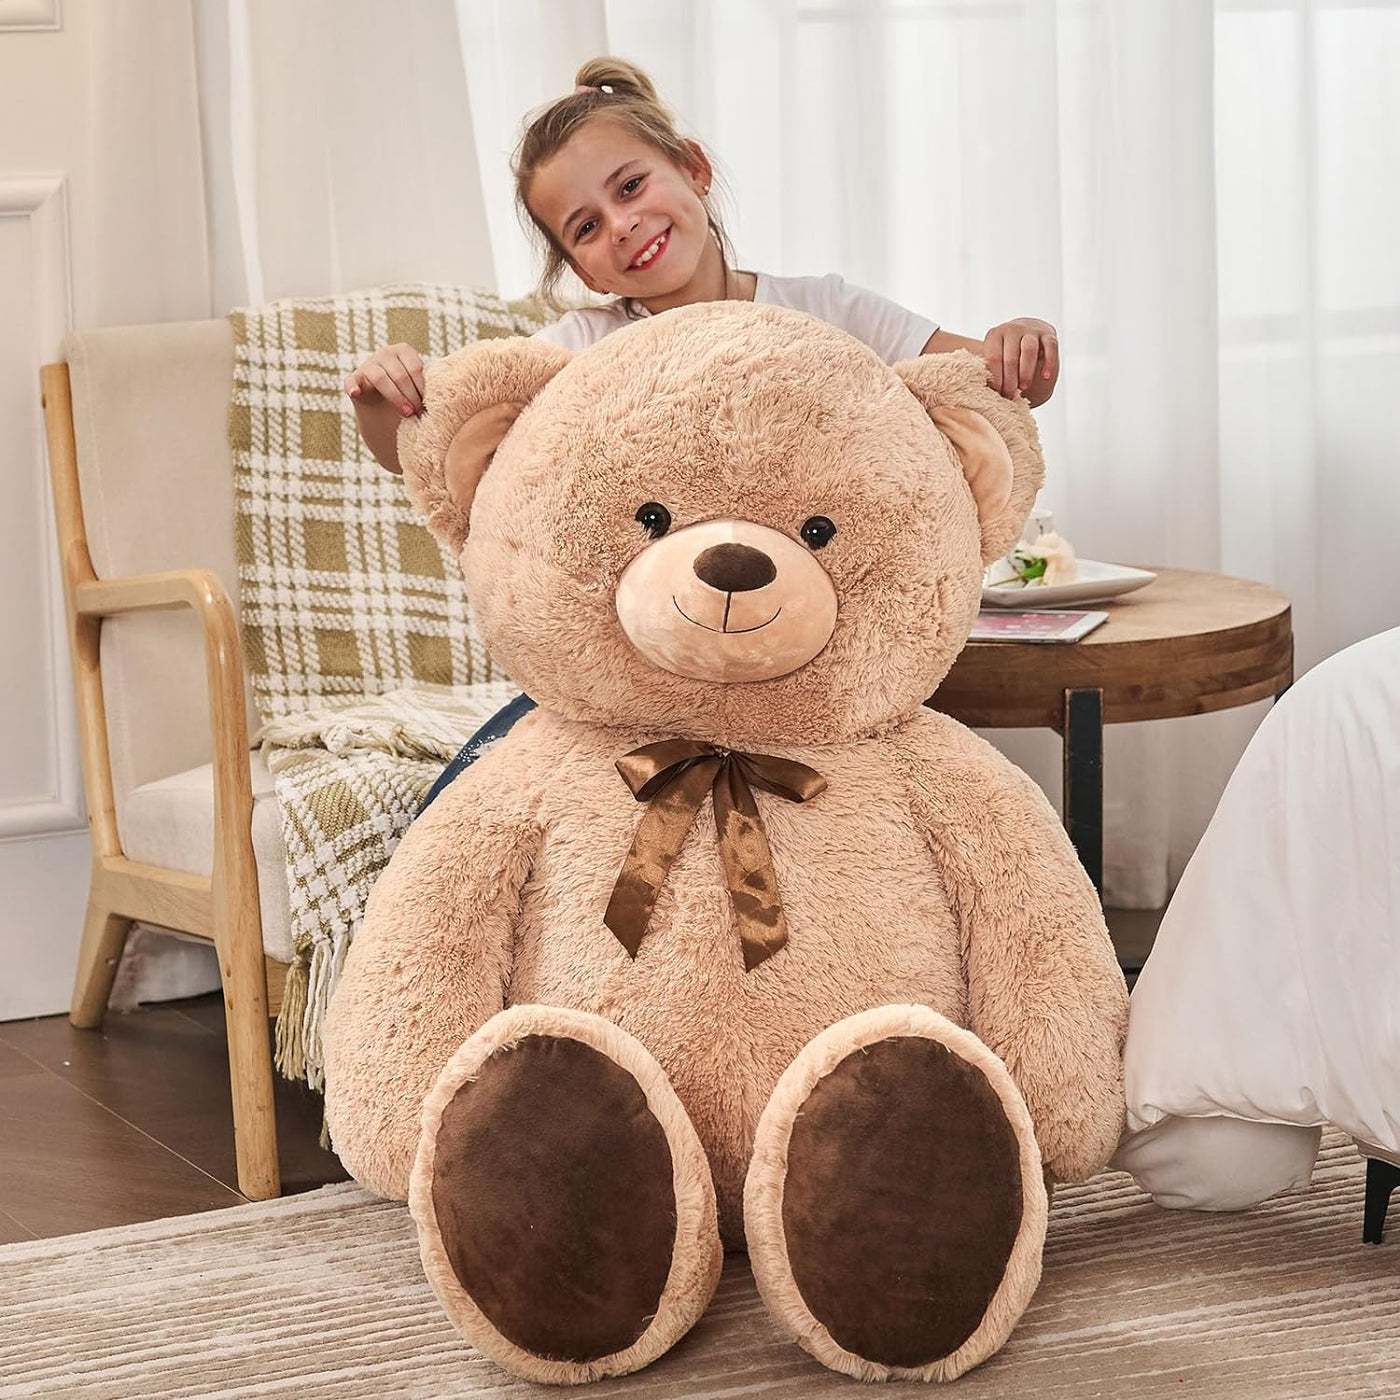 Giant Teddy Bear Plush Toy, Pink/Light Brown, 47 Inches